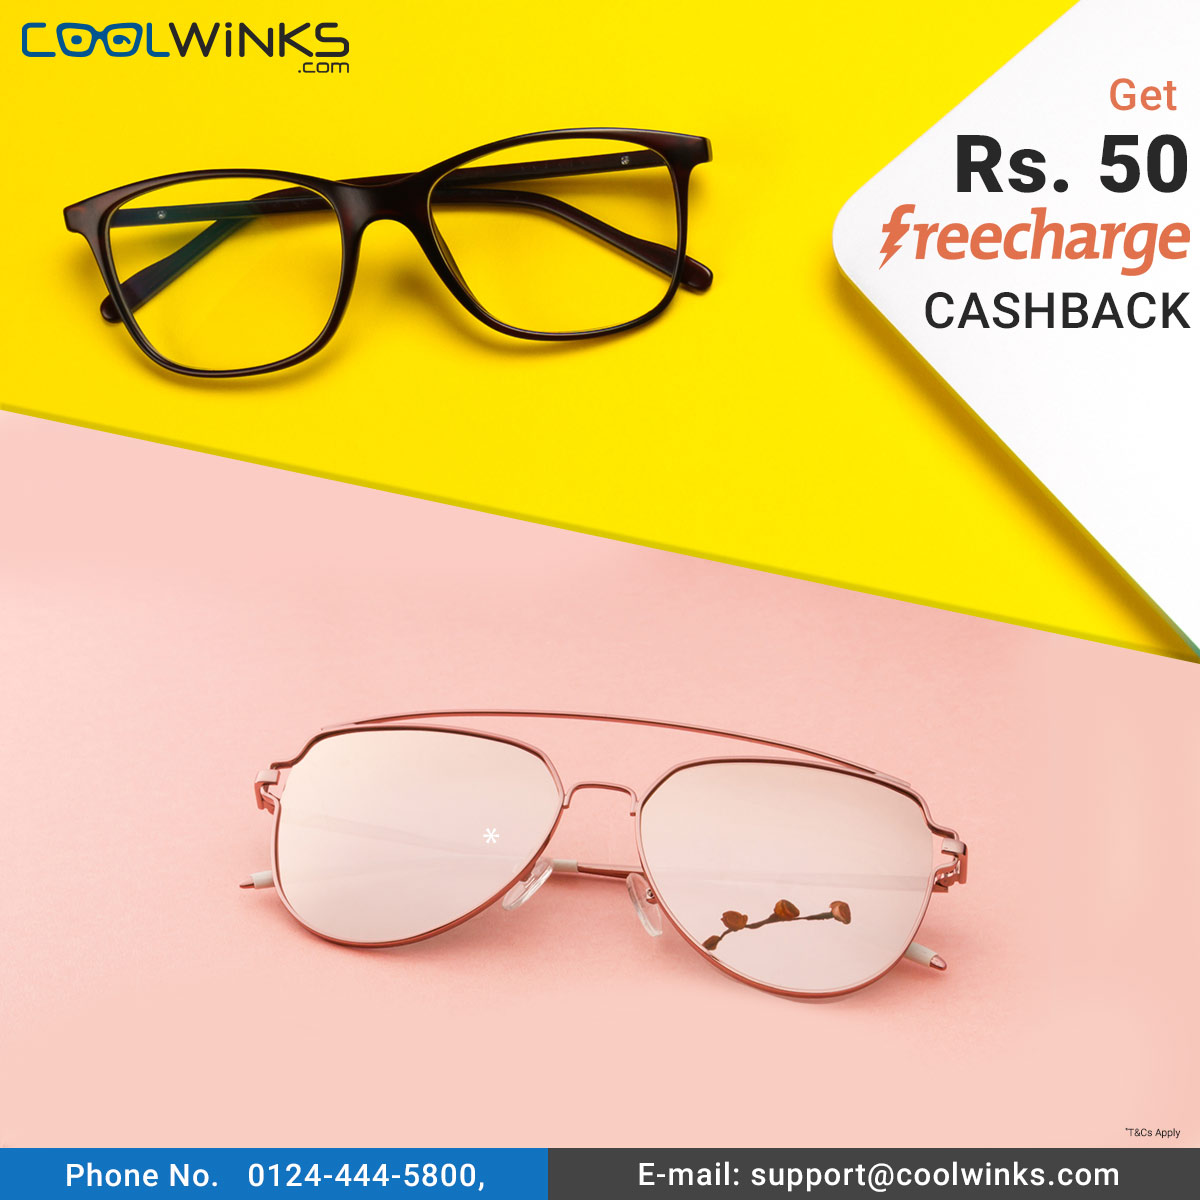 CoolWinks - Nothing is better than owning a pair of #Reebok #Sunglasses!  Plunge into action with all new #bold & #sporty styles available at # Coolwinks. Hurry! Shop Now - https://goo.gl/pKVYM8 #onlineshopping #eyecare  #